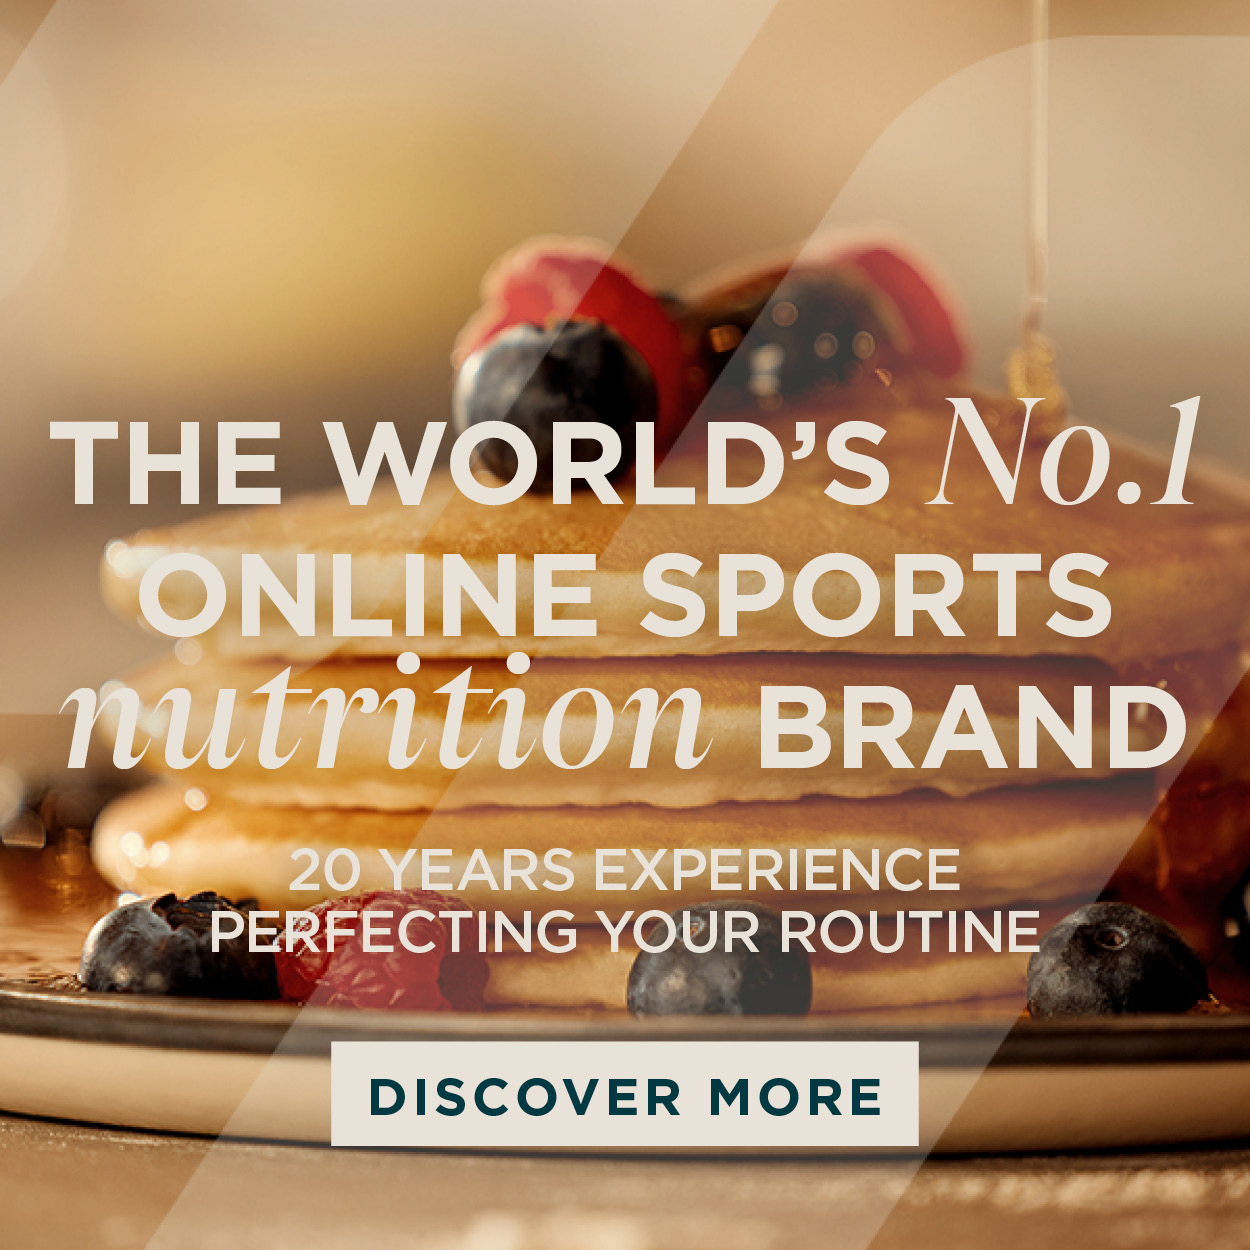 The UKs number 1 online sports nutrition brand. 20 years experience perfecting your routine.